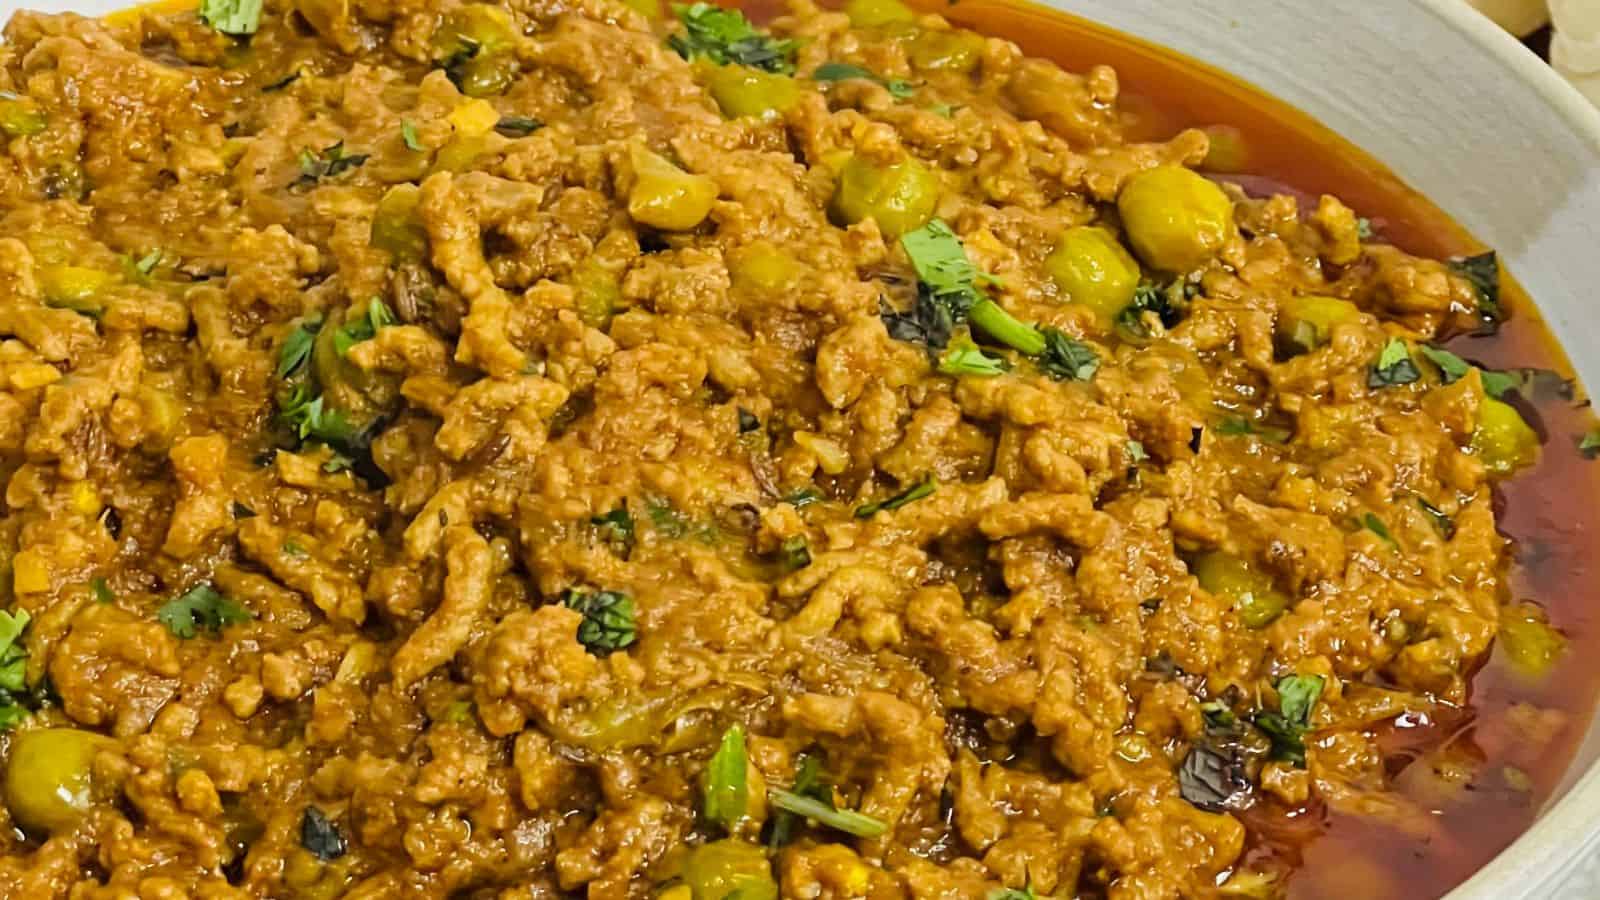 Close-up of cooked minced meat with green olives and chopped herbs in a sauce.